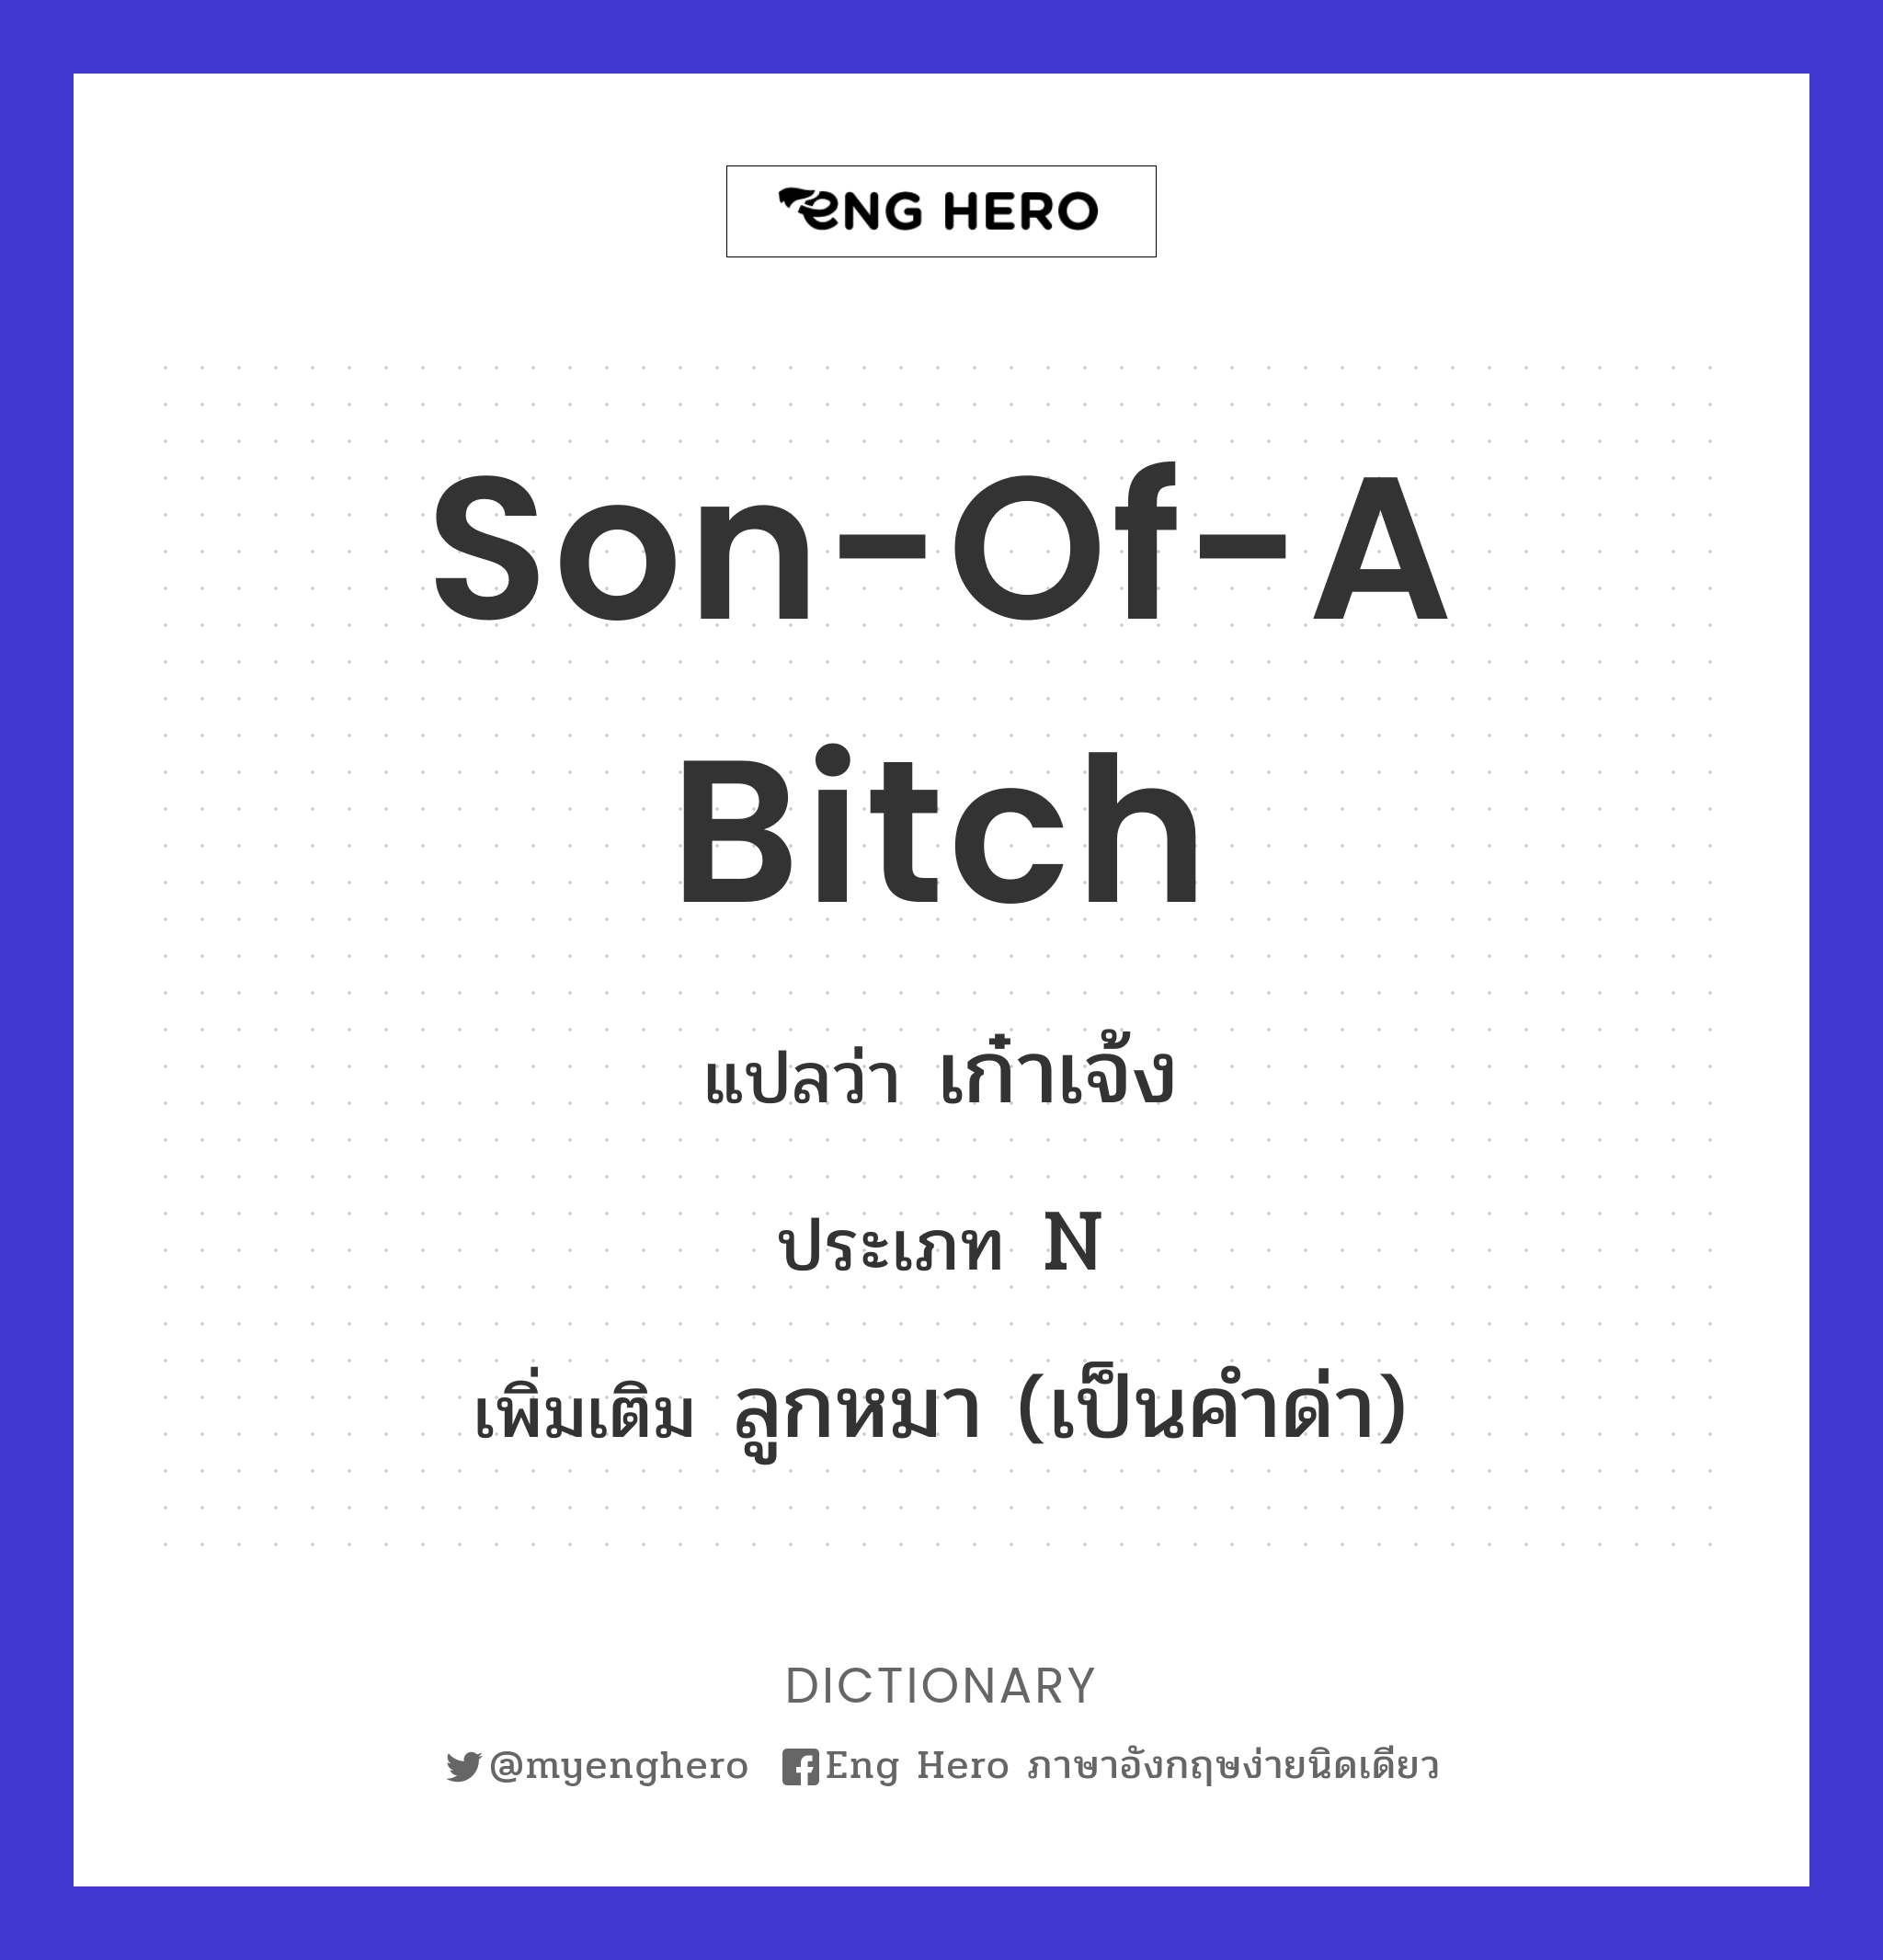 son-of-a bitch